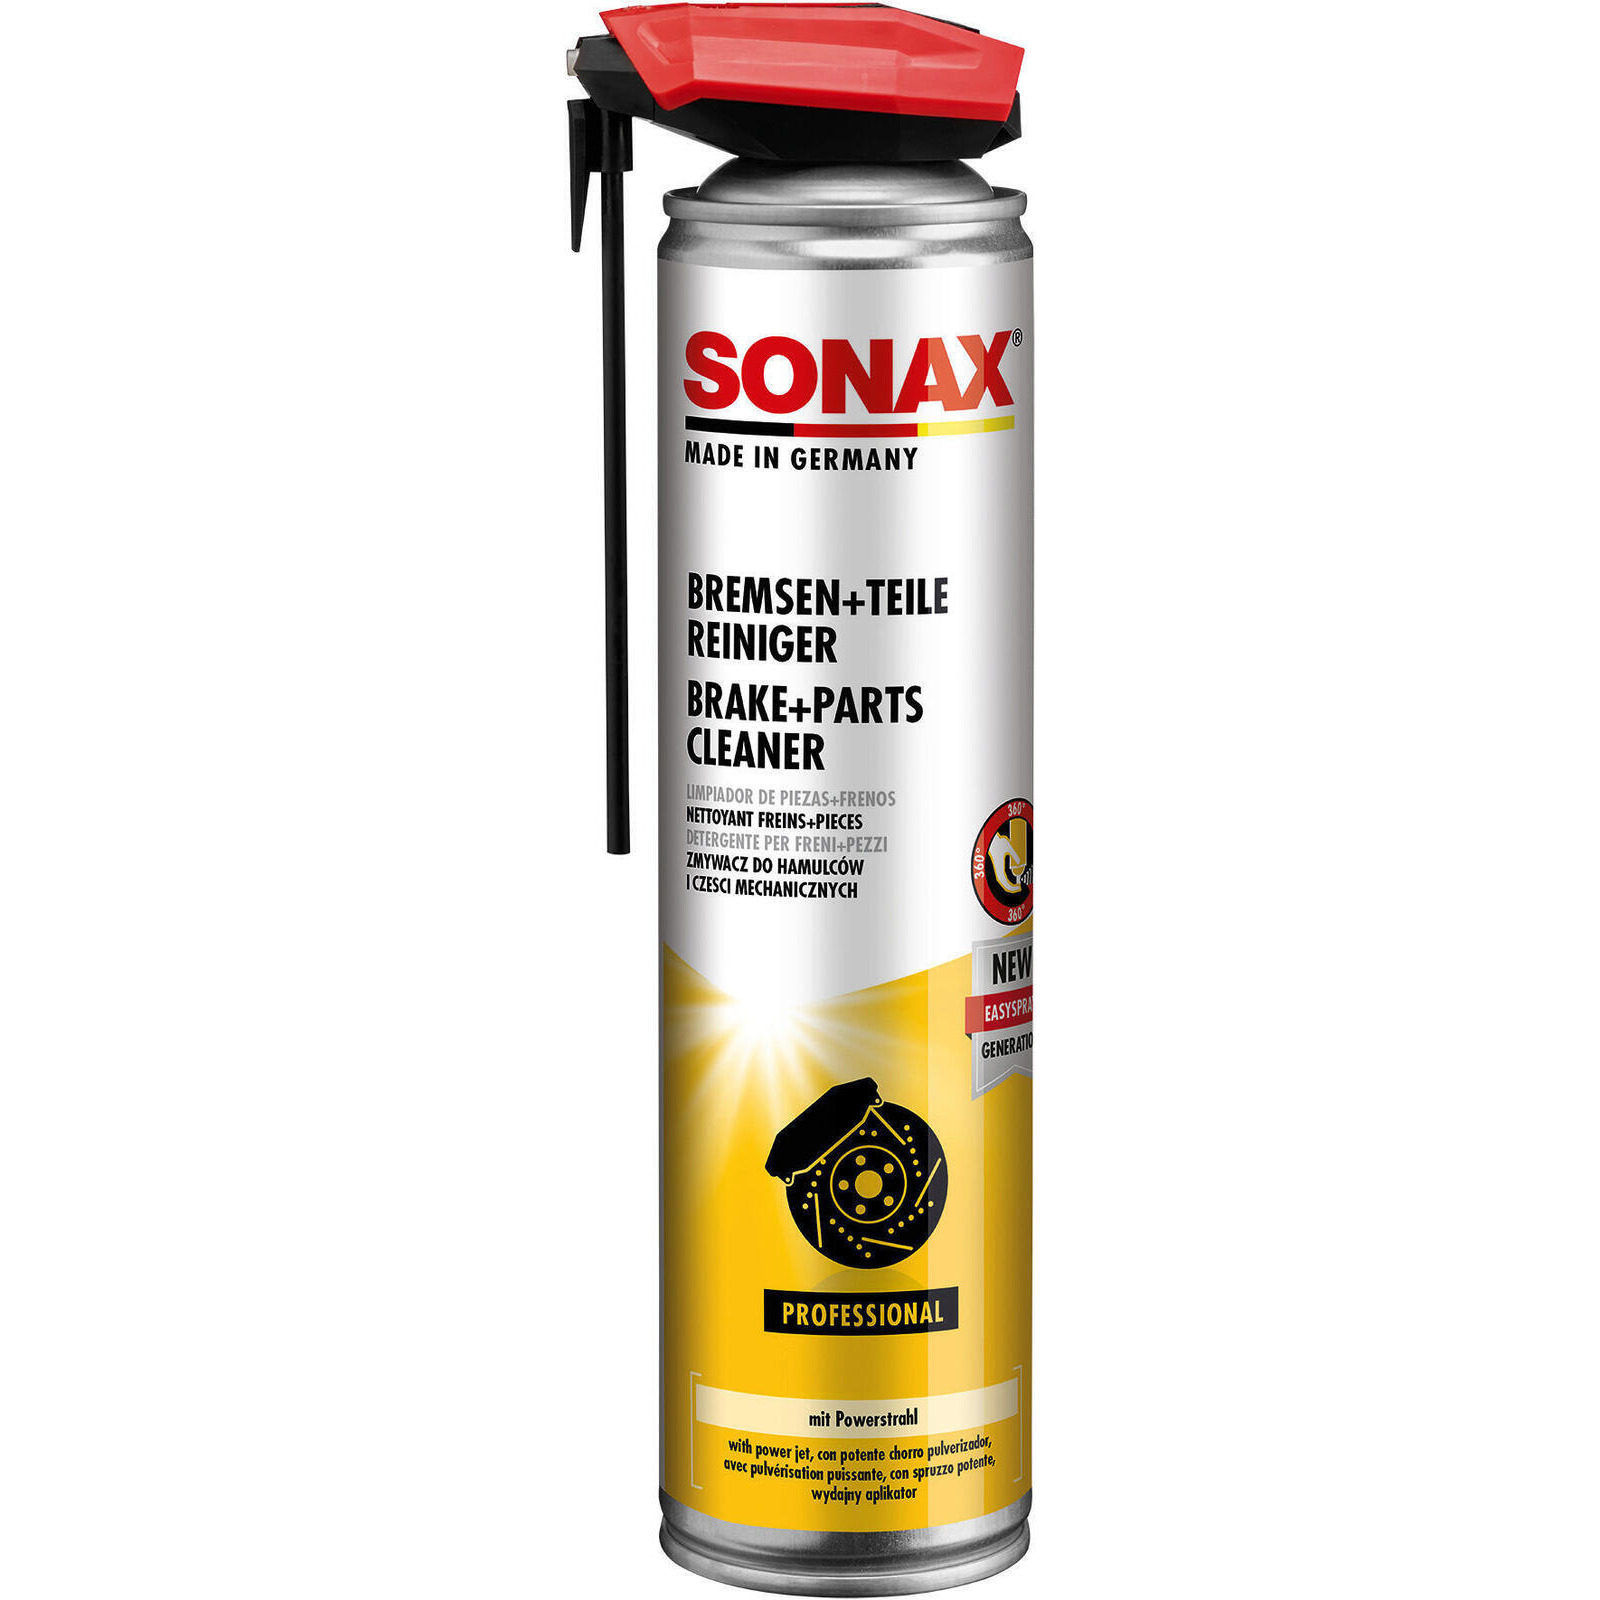 SONAX Brake / Clutch Cleaner Brake + parts cleaner with EasySpray